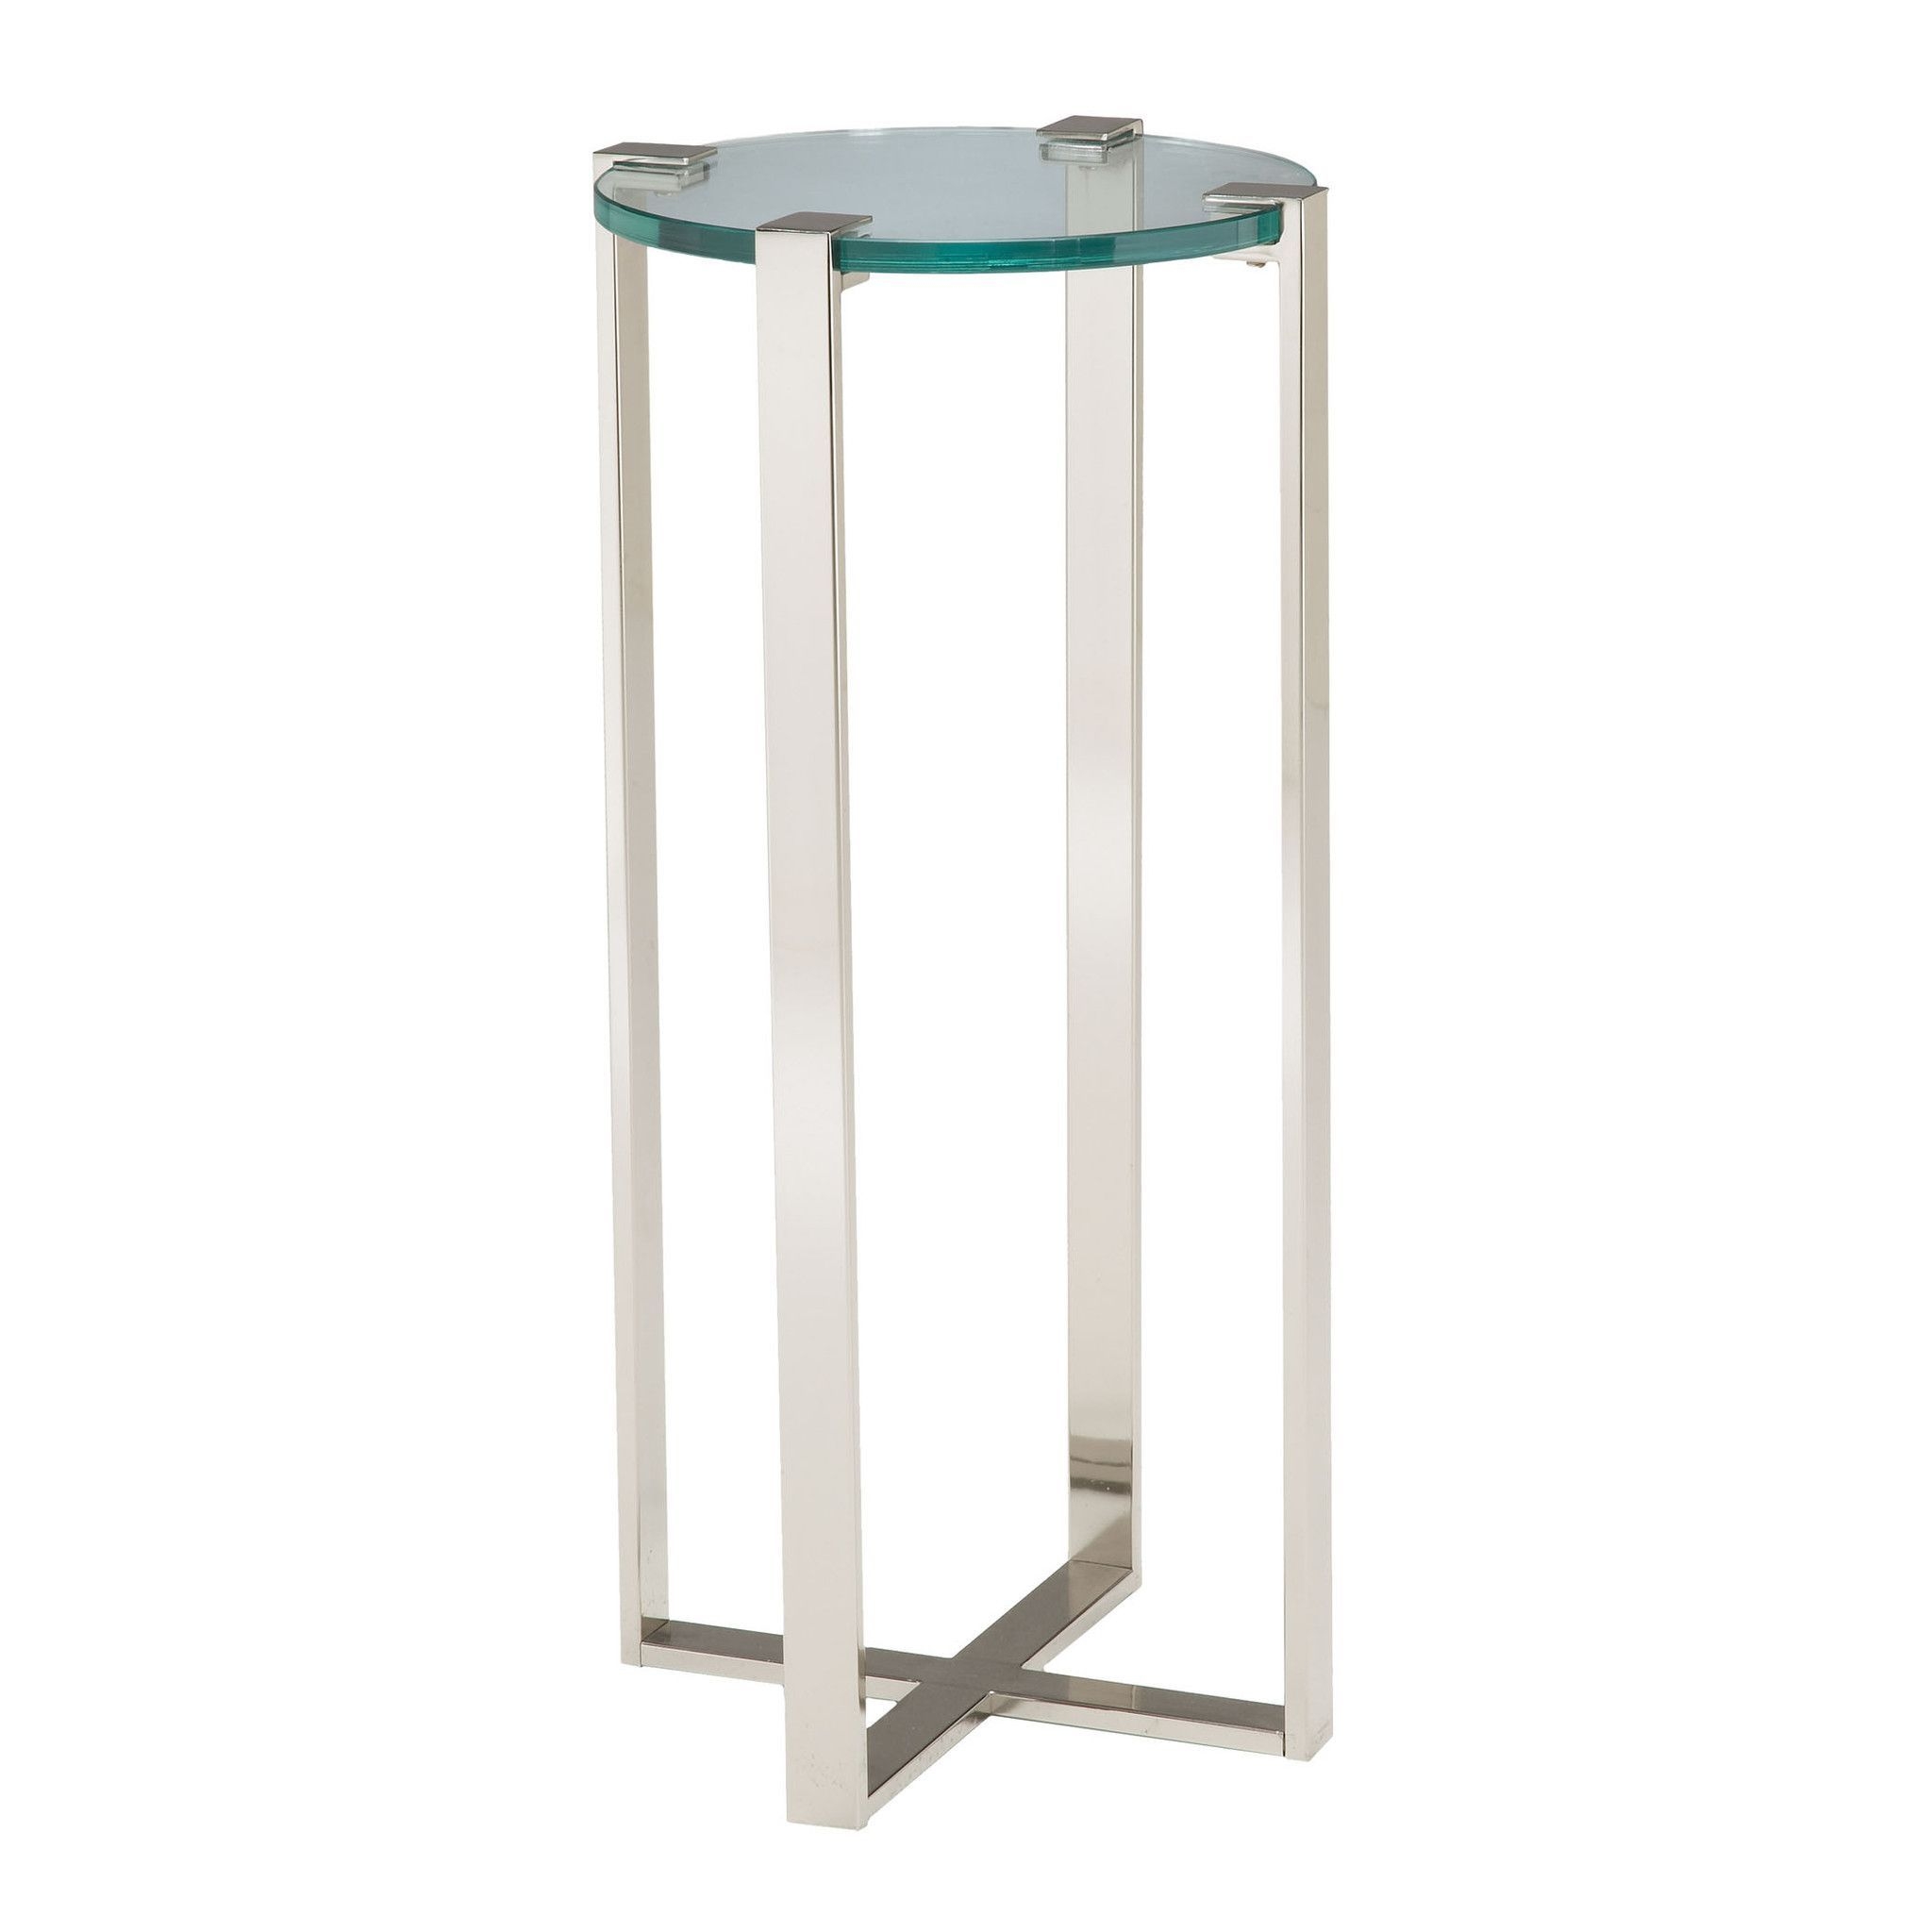 Gables plant stand features plant stand contemporary plant stand